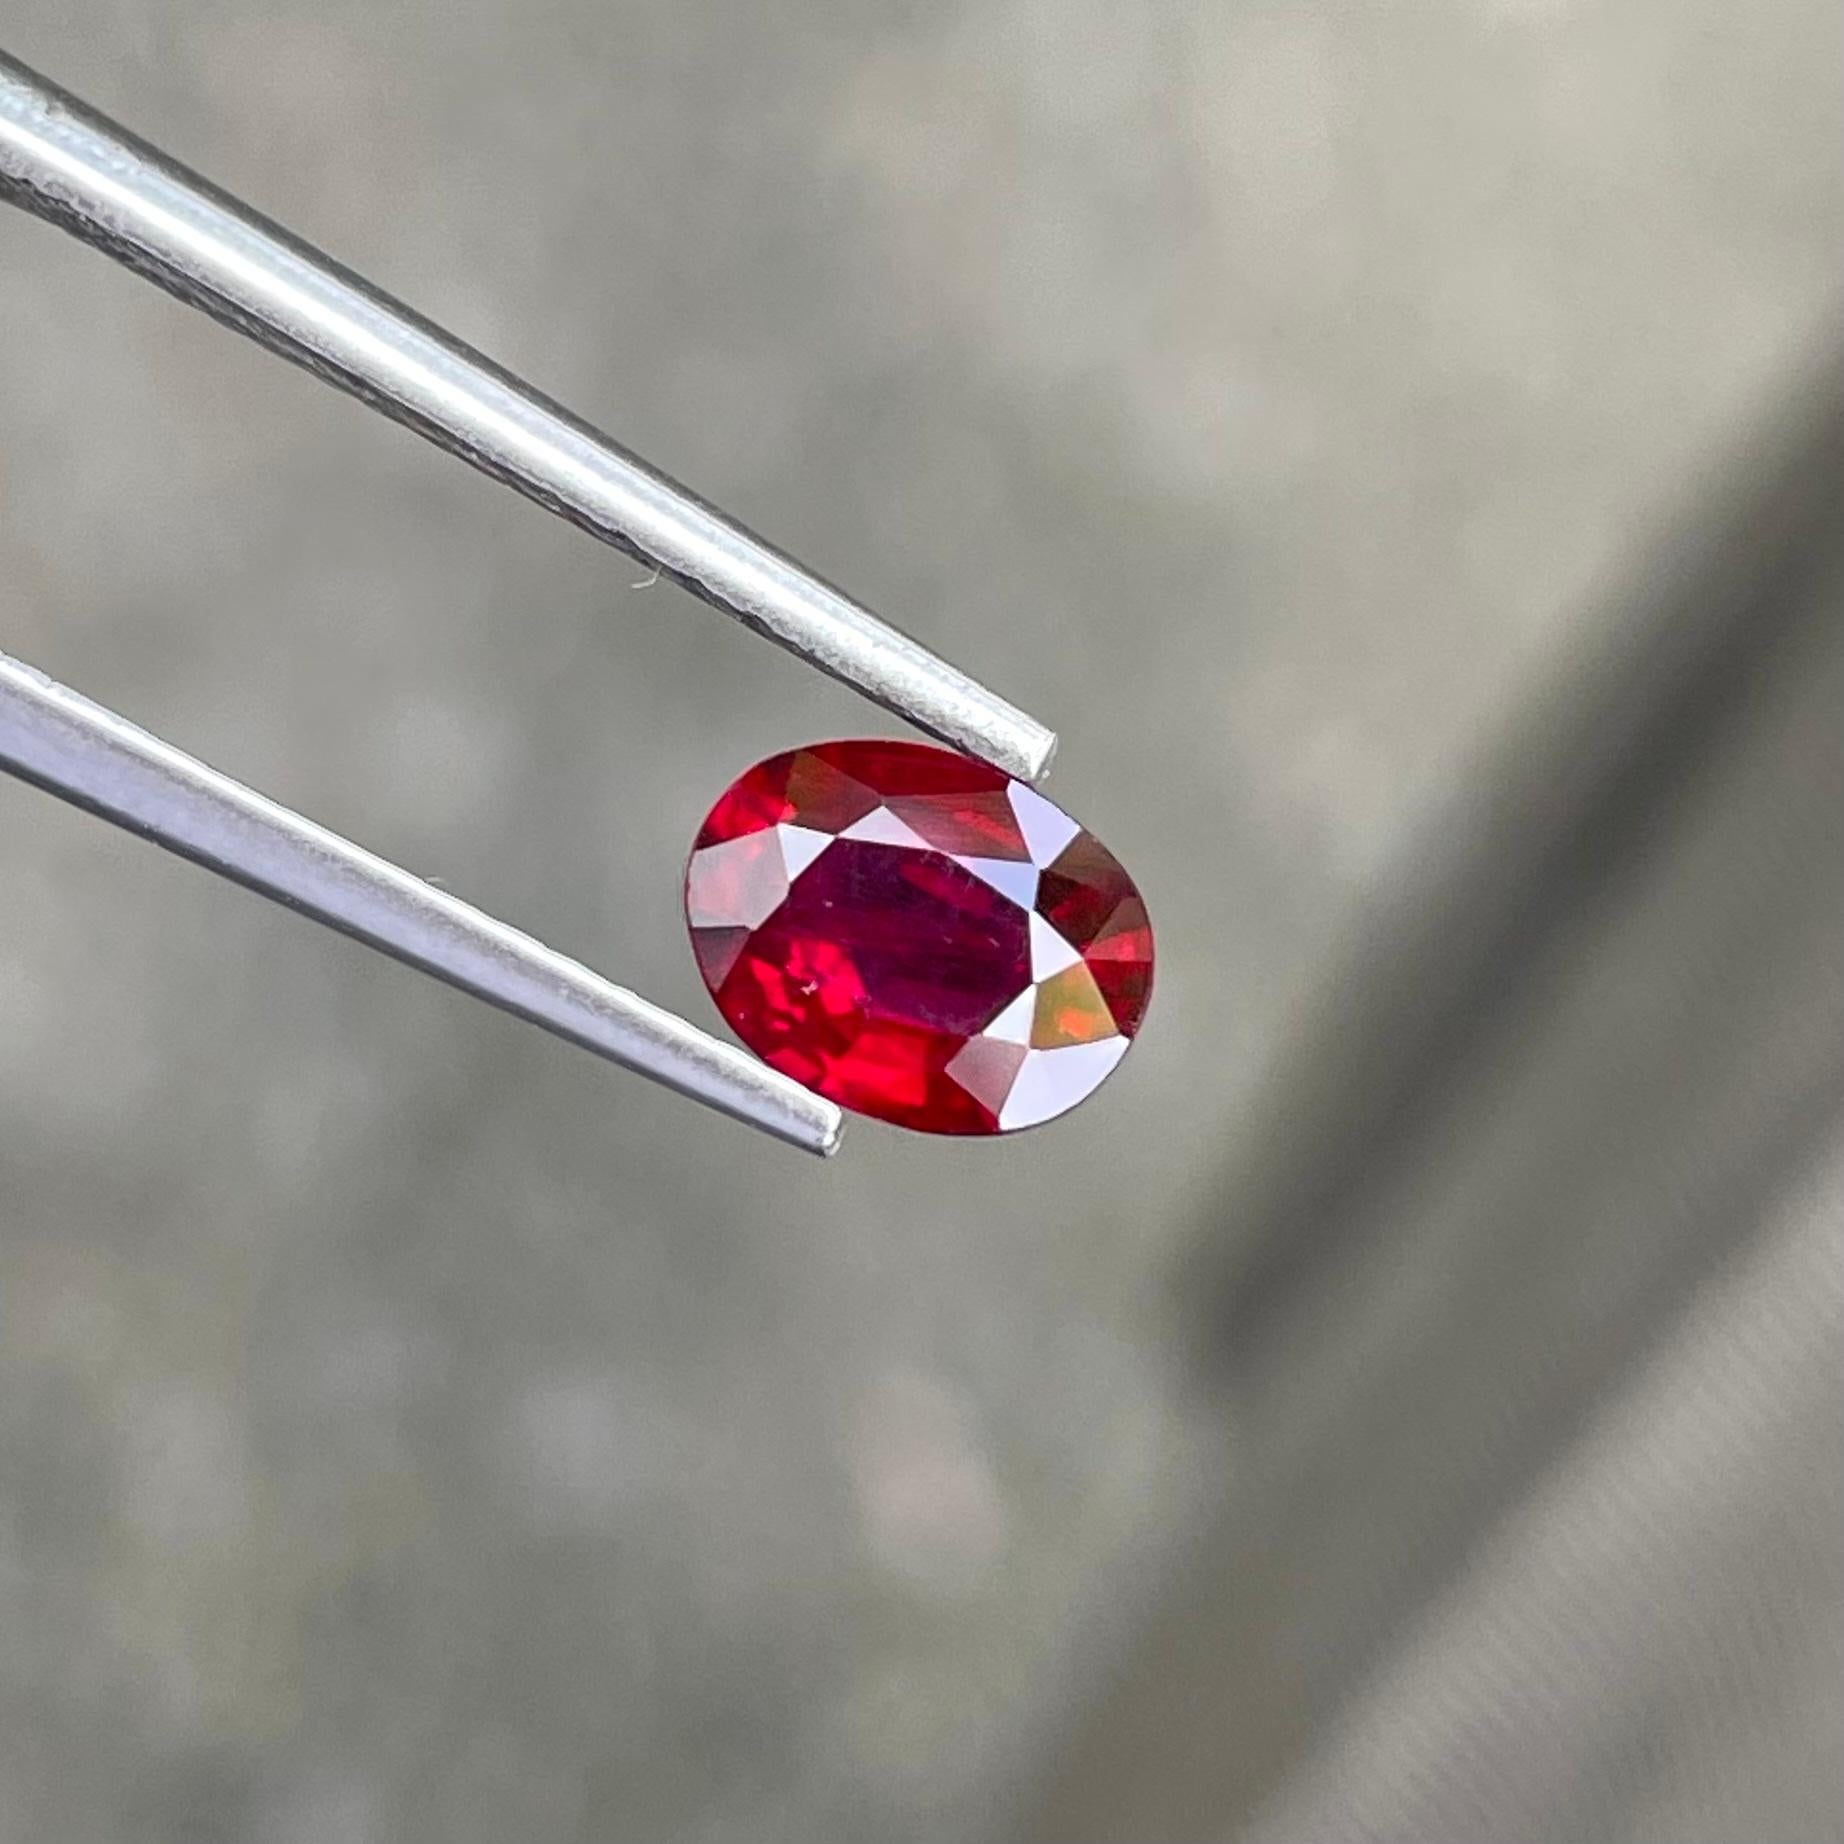 Gemstone Type Natural Ruby Gemstone
Weight 0.80 Carats
Dimensions 6.8 x 5.3 x 2.8 mm
Clarity VVS (Very, Very Slightly Included)
Origin Mozambique
Treatment Heated
Shape Faceted Oval Cut




This exquisite Mozambique Red Ruby is a true testament to